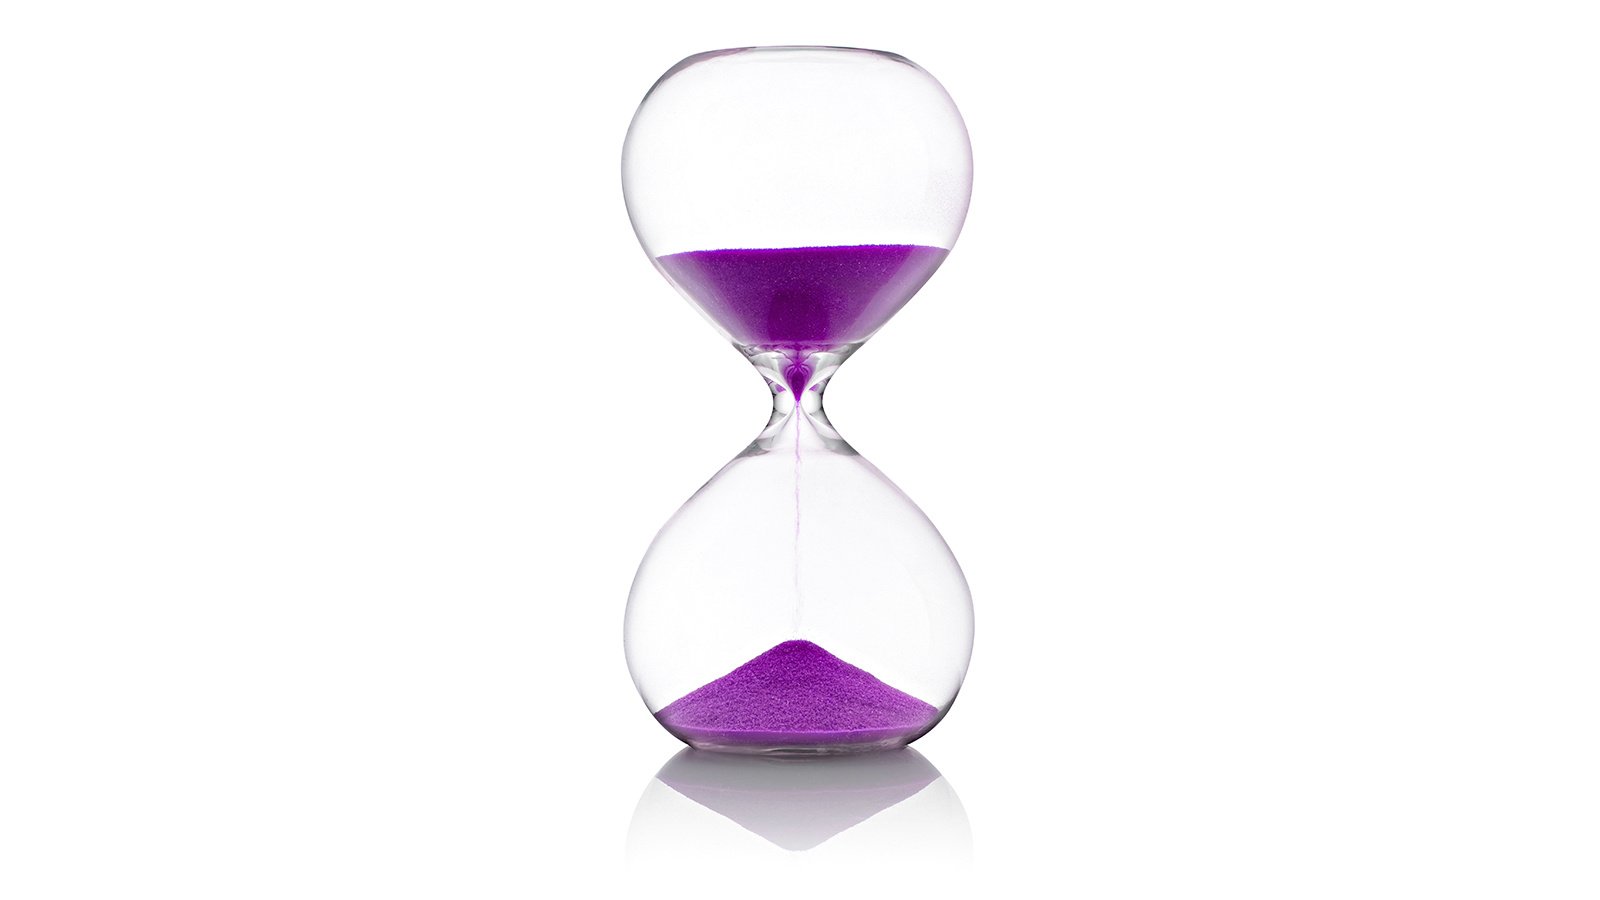 Hourglass with violet sand measuring time against white background